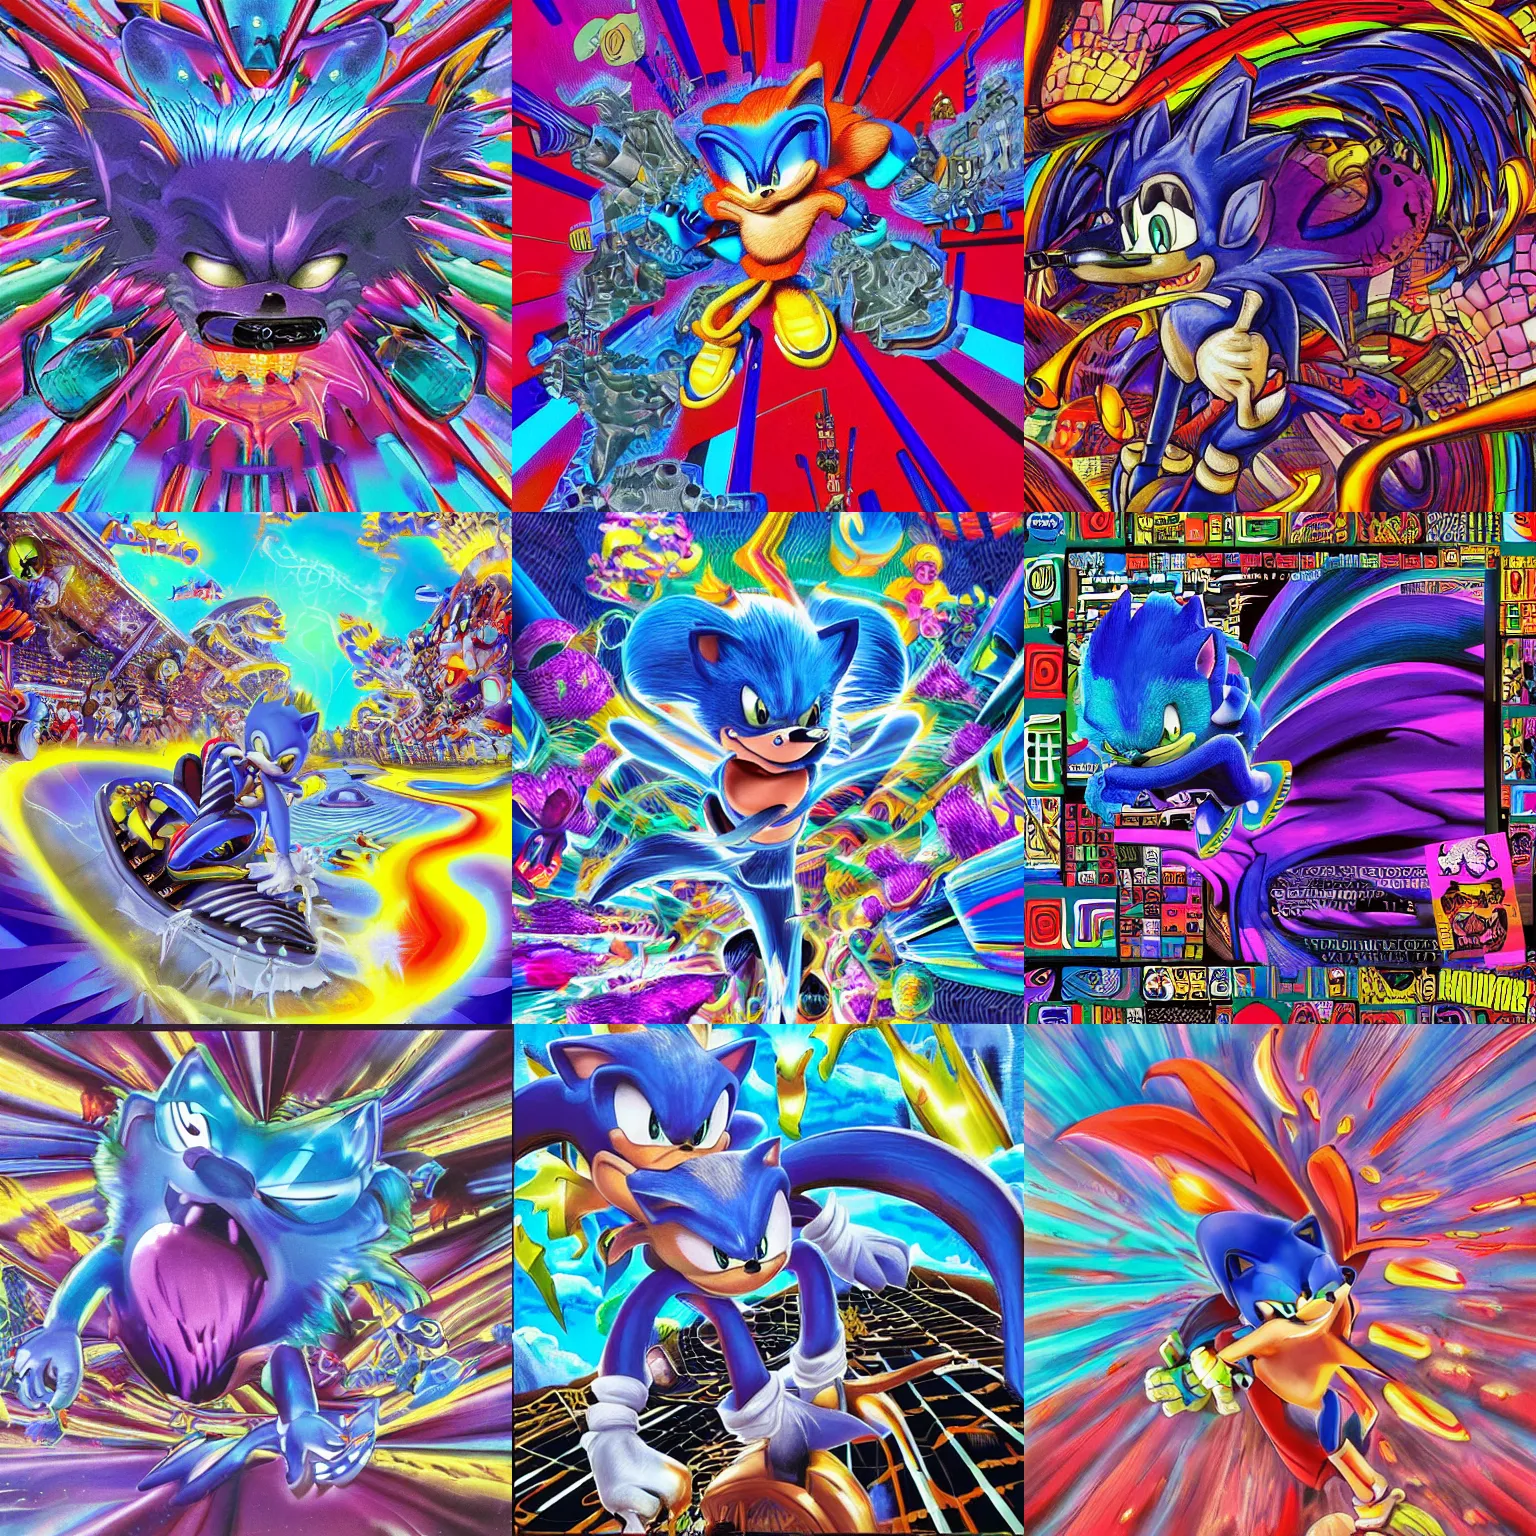 Prompt: surreal, sharp, detailed sonic hedgehog professional, high quality airbrush art MGMT album cover of a liquid dissolving LSD DMT blue sonic the hedgehog surfing through cyberspace, purple checkerboard background, 1990s 1992 Sega Genesis video game album cover